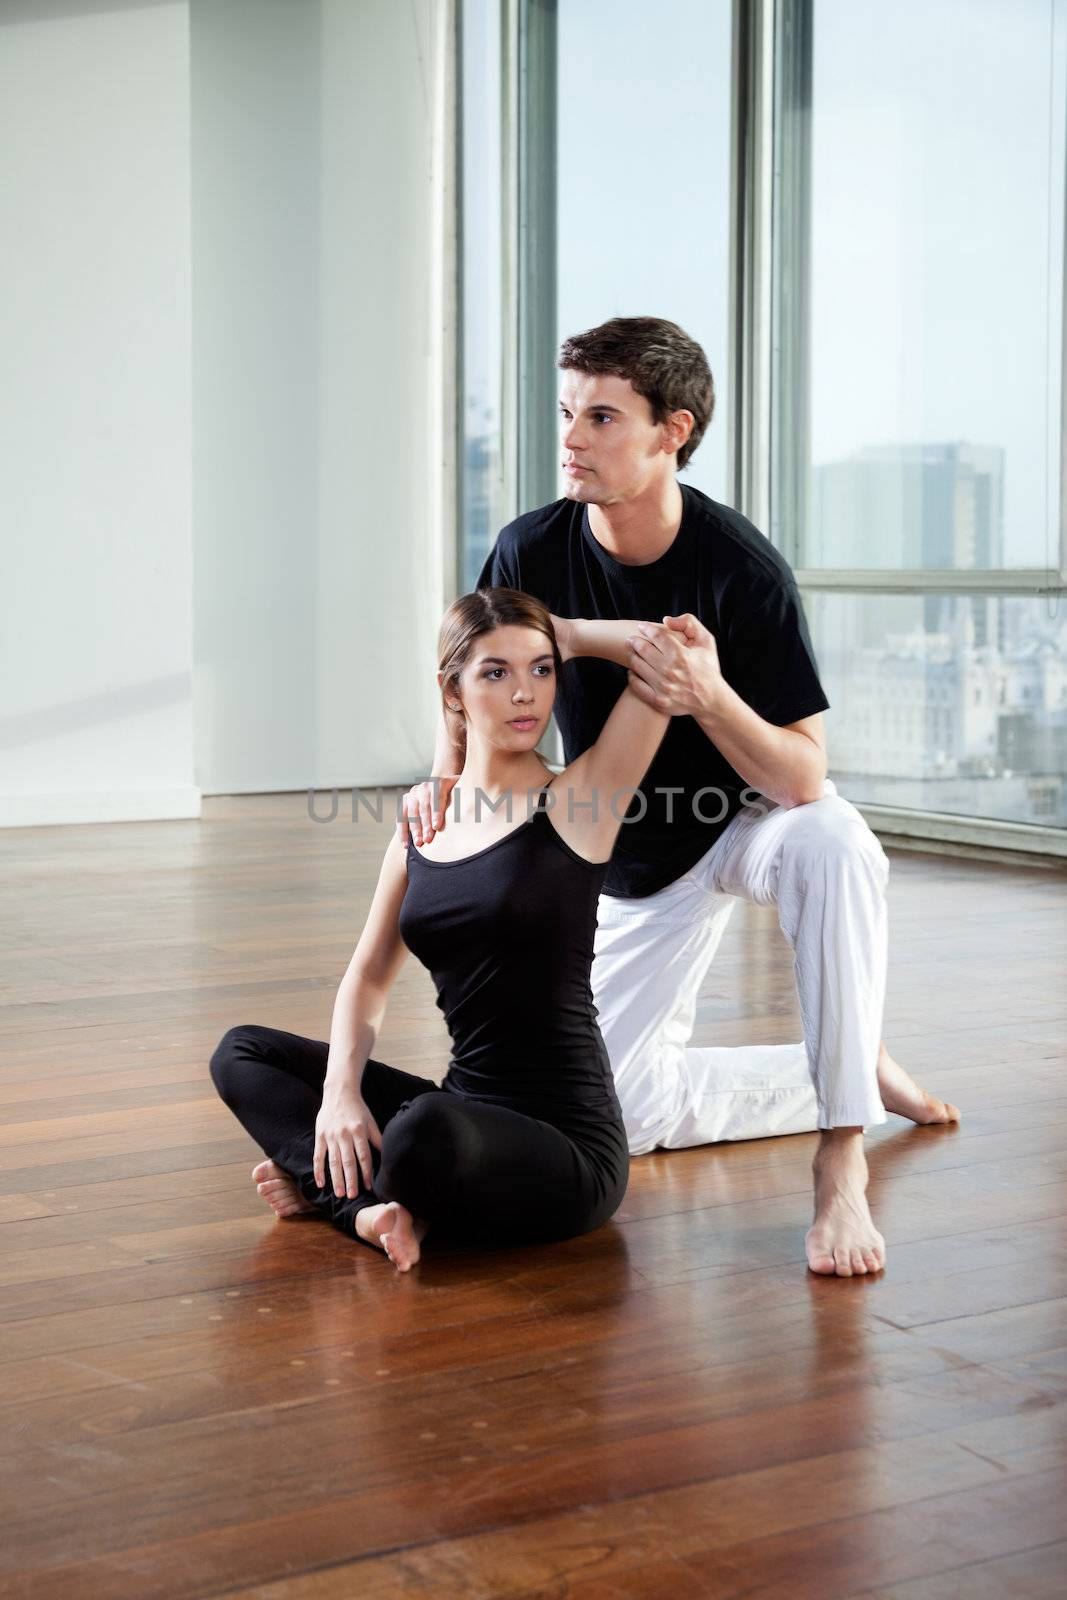 Yoga male instructor teaching yoga positions to young woman at gym